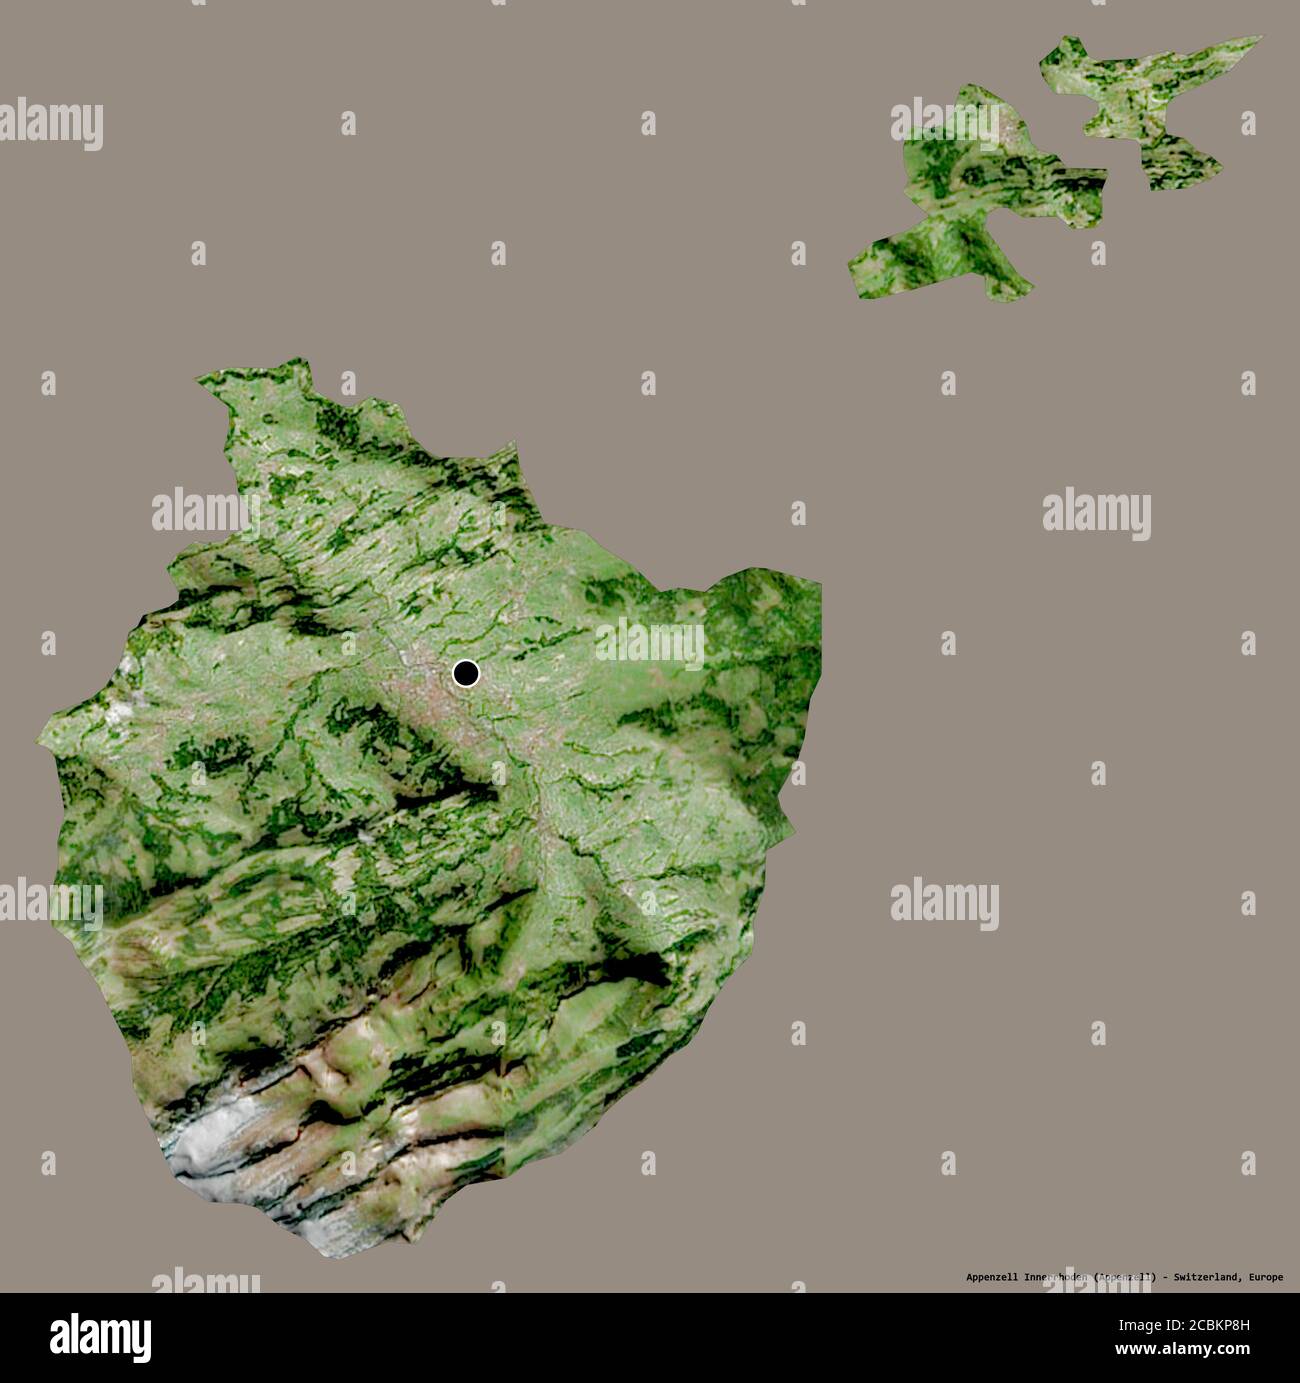 Shape of Appenzell Innerrhoden, canton of Switzerland, with its capital isolated on a solid color background. Satellite imagery. 3D rendering Stock Photo